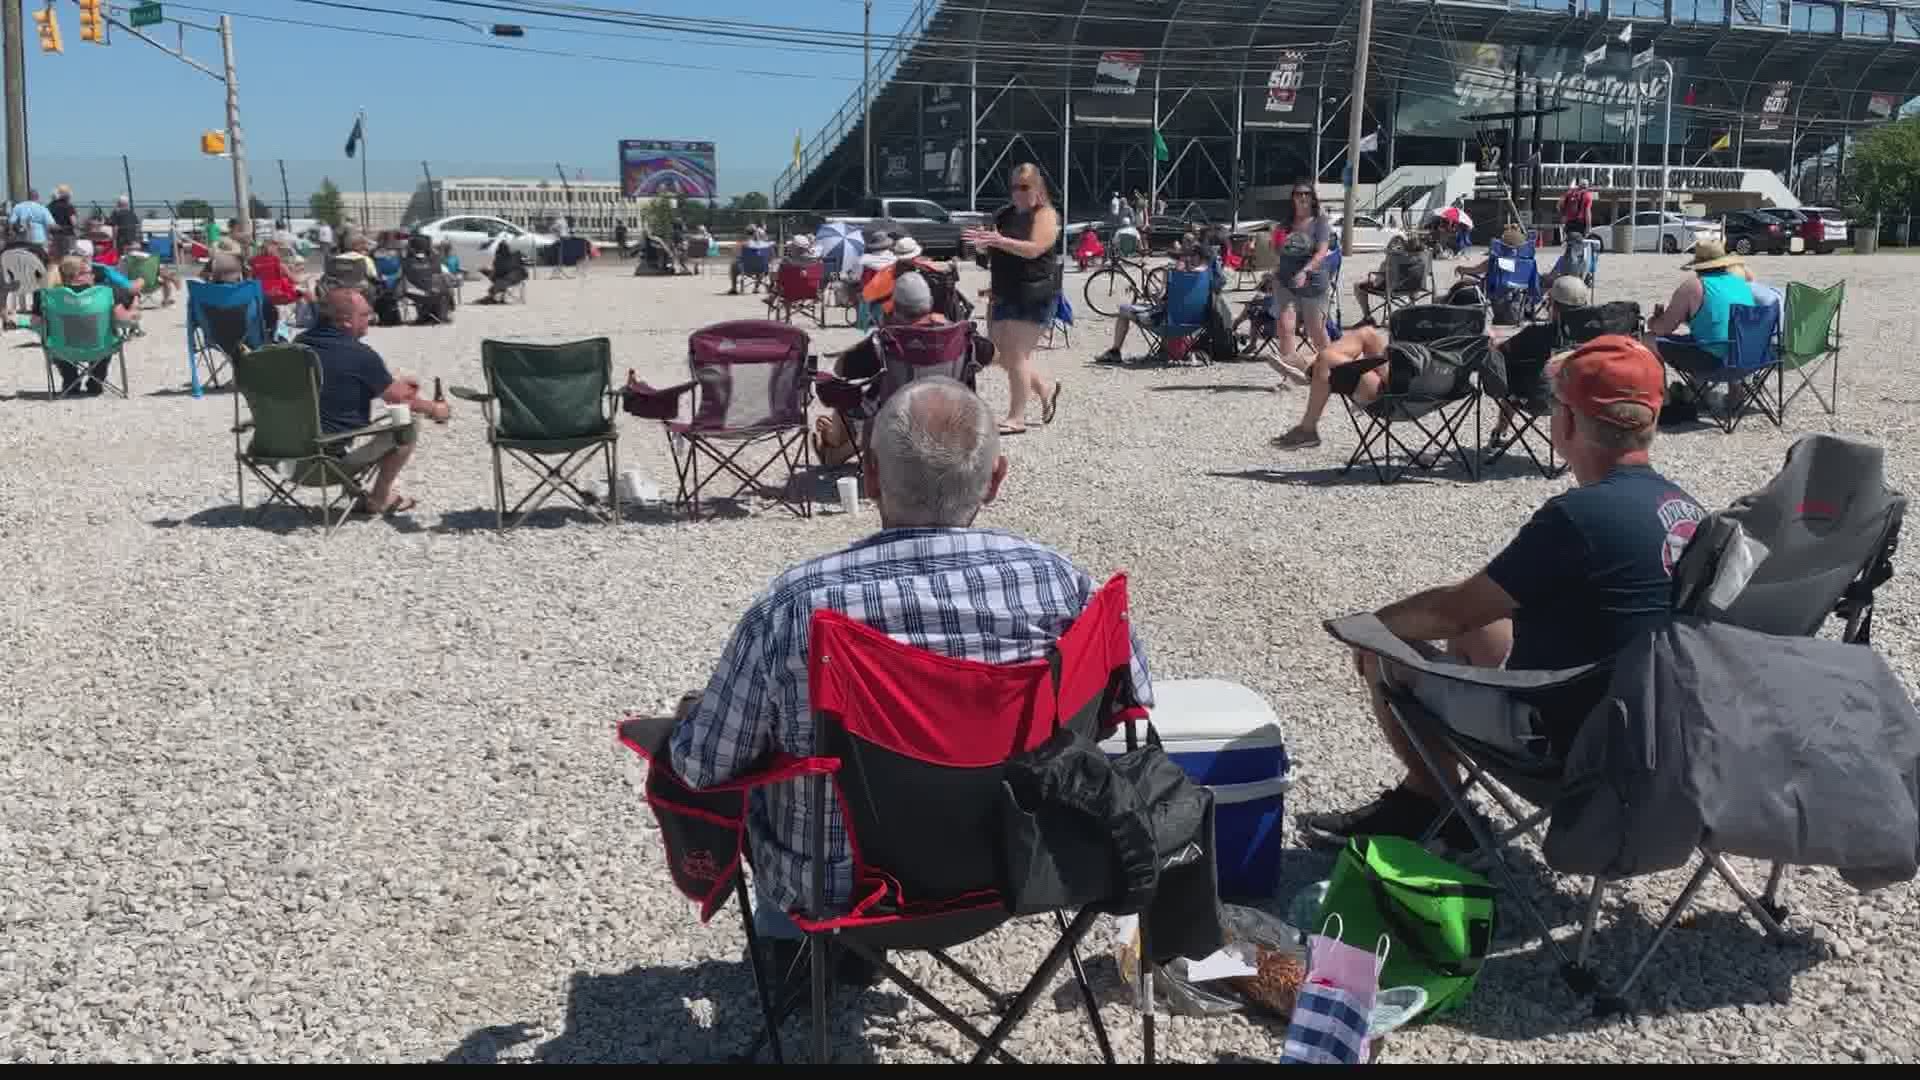 Die hard race fans still plan to gather outside the Motor Speedway.